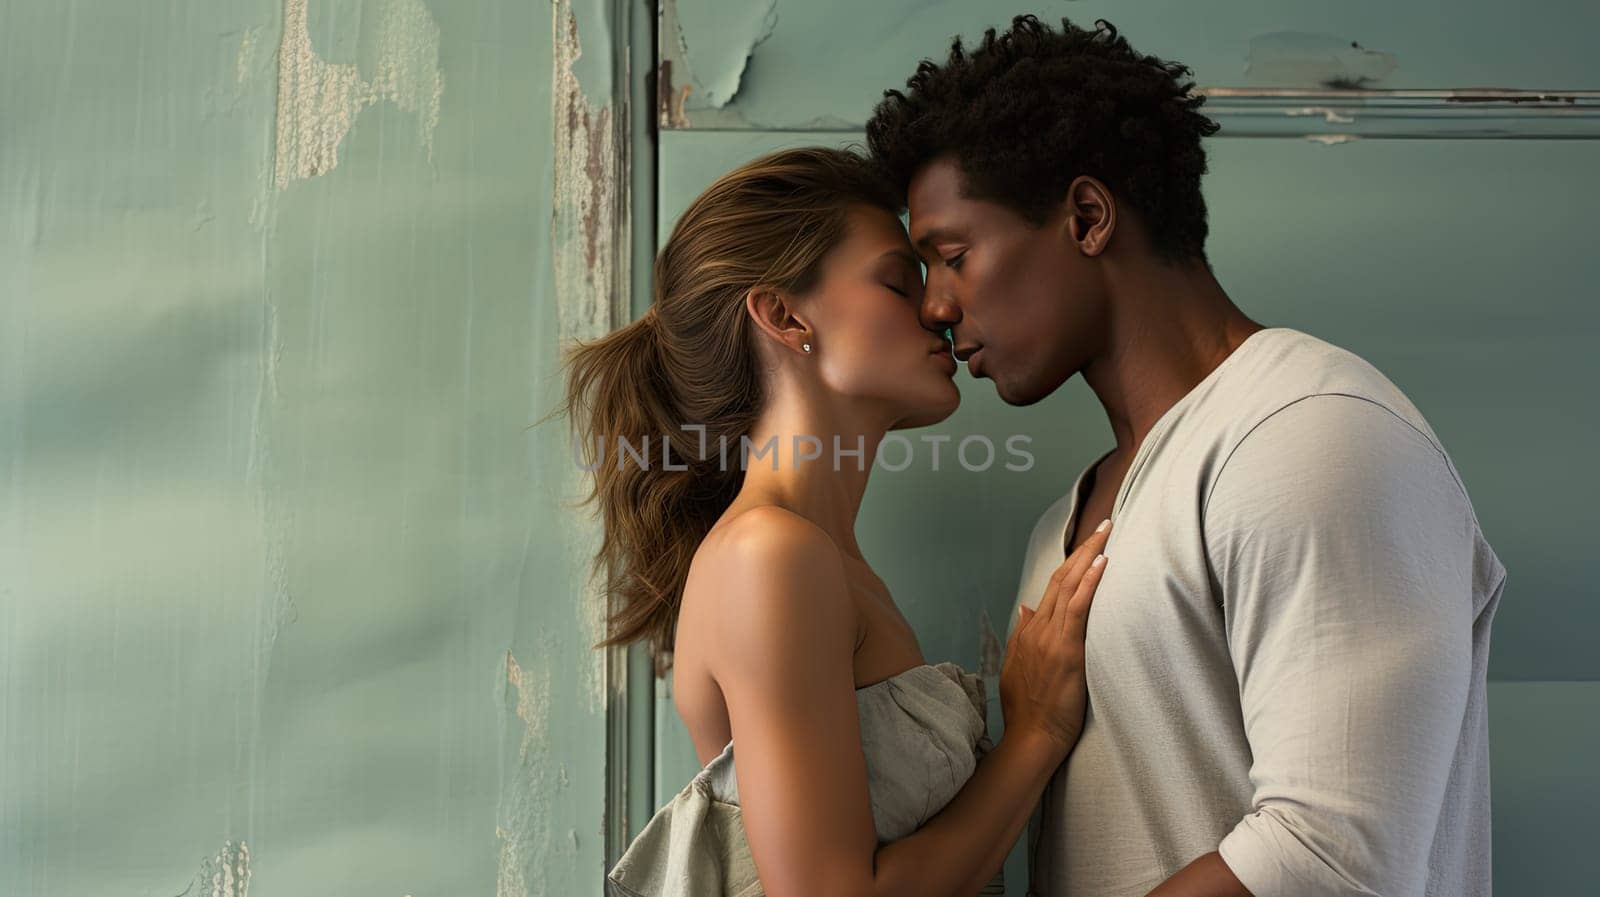 Interracial boyfriend and girlfriend kissing with copy space by papatonic